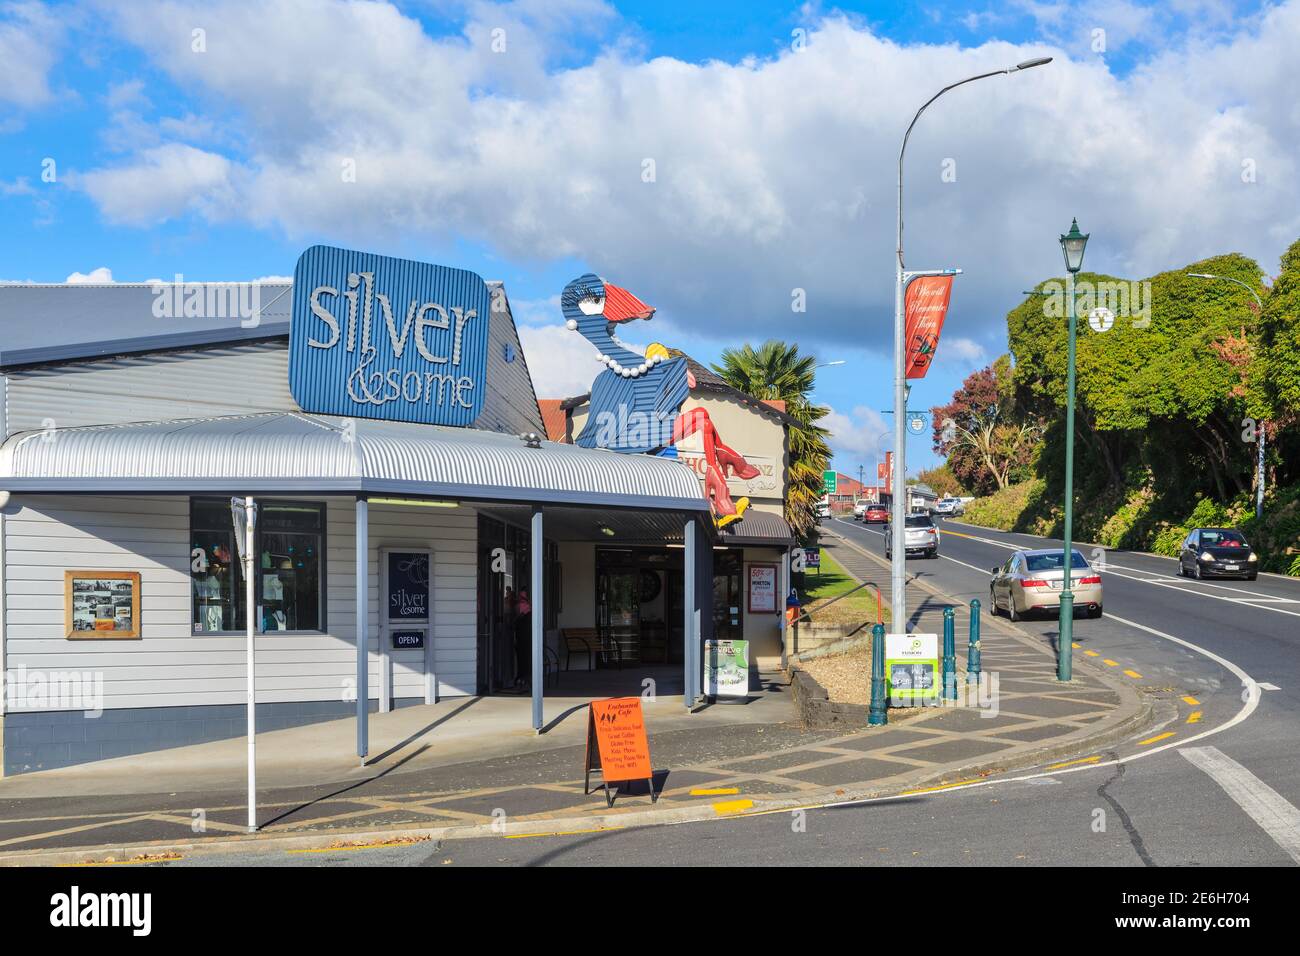 Tirau, New Zealand, known for its many corrugated iron artworks. A sculpture of a pukeko (native bird) on top of the 'Silver & Some' jewelry store Stock Photo